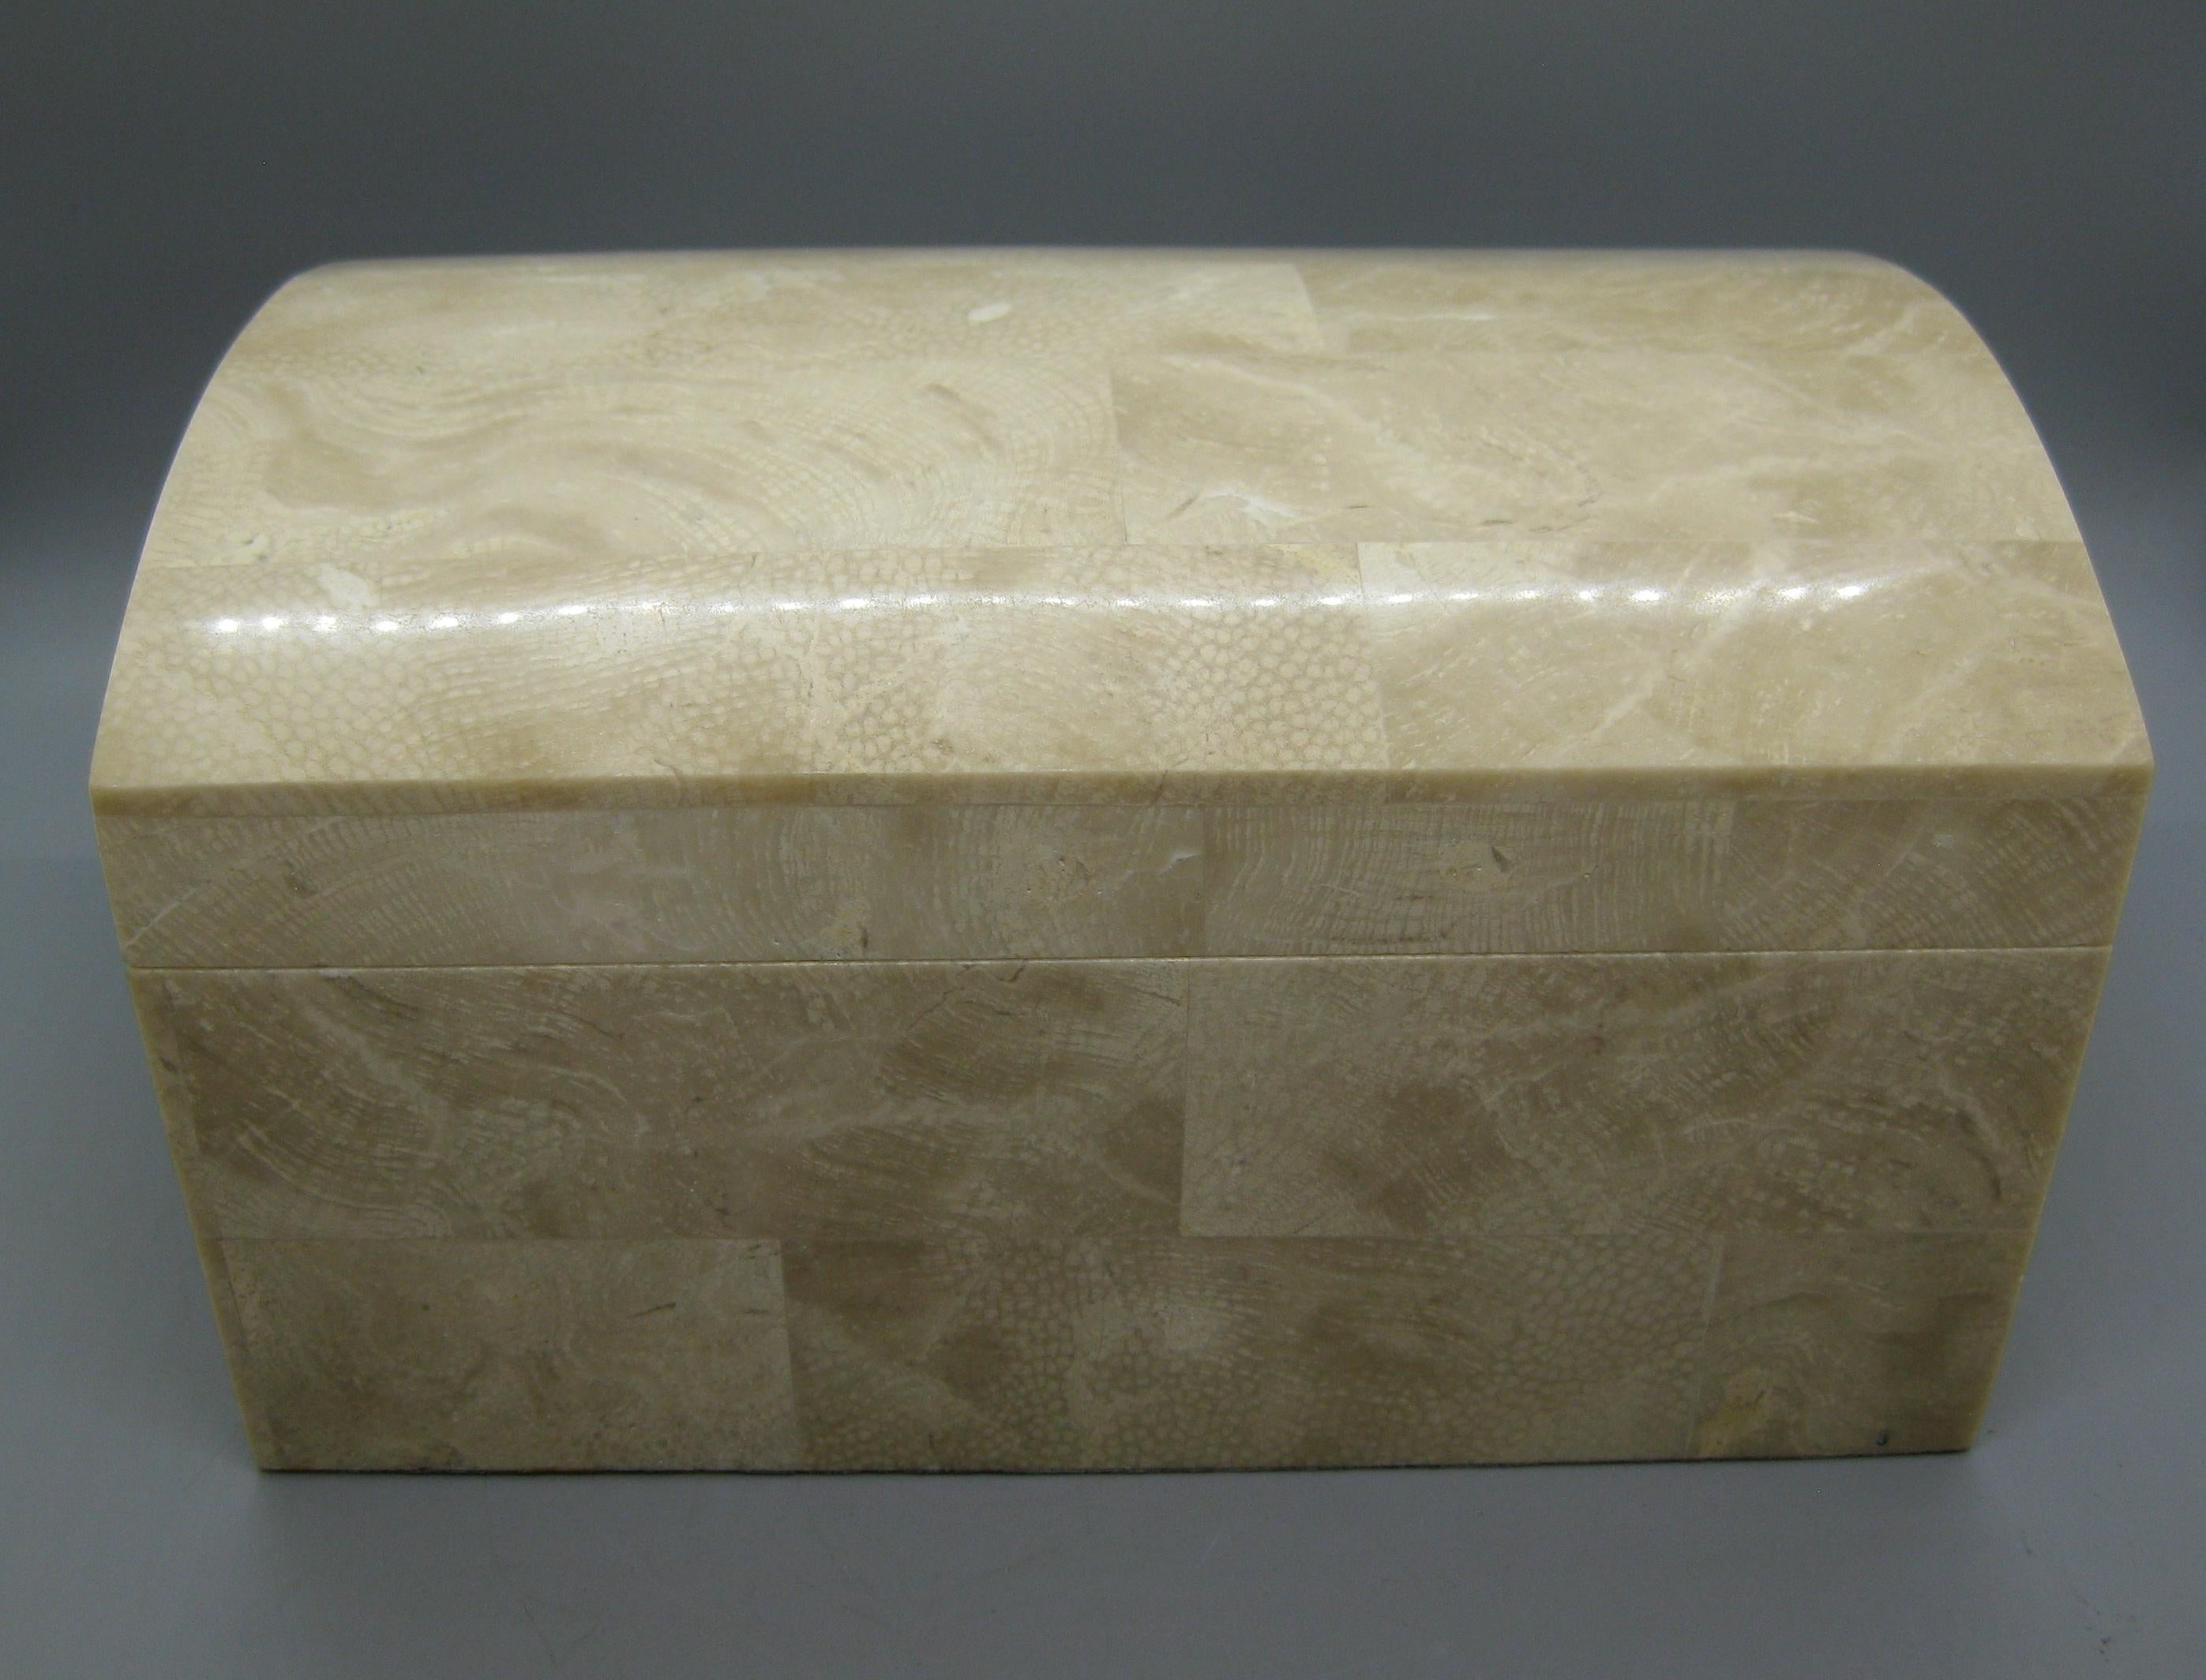 We are offering a beautiful elegant natural tessellated mosaic fossilized coral stone decorative stash box designed by Maitland Smith. This box does not have the original tag on the inside, but guaranteed designed by Maitland Smith. Has a dome top